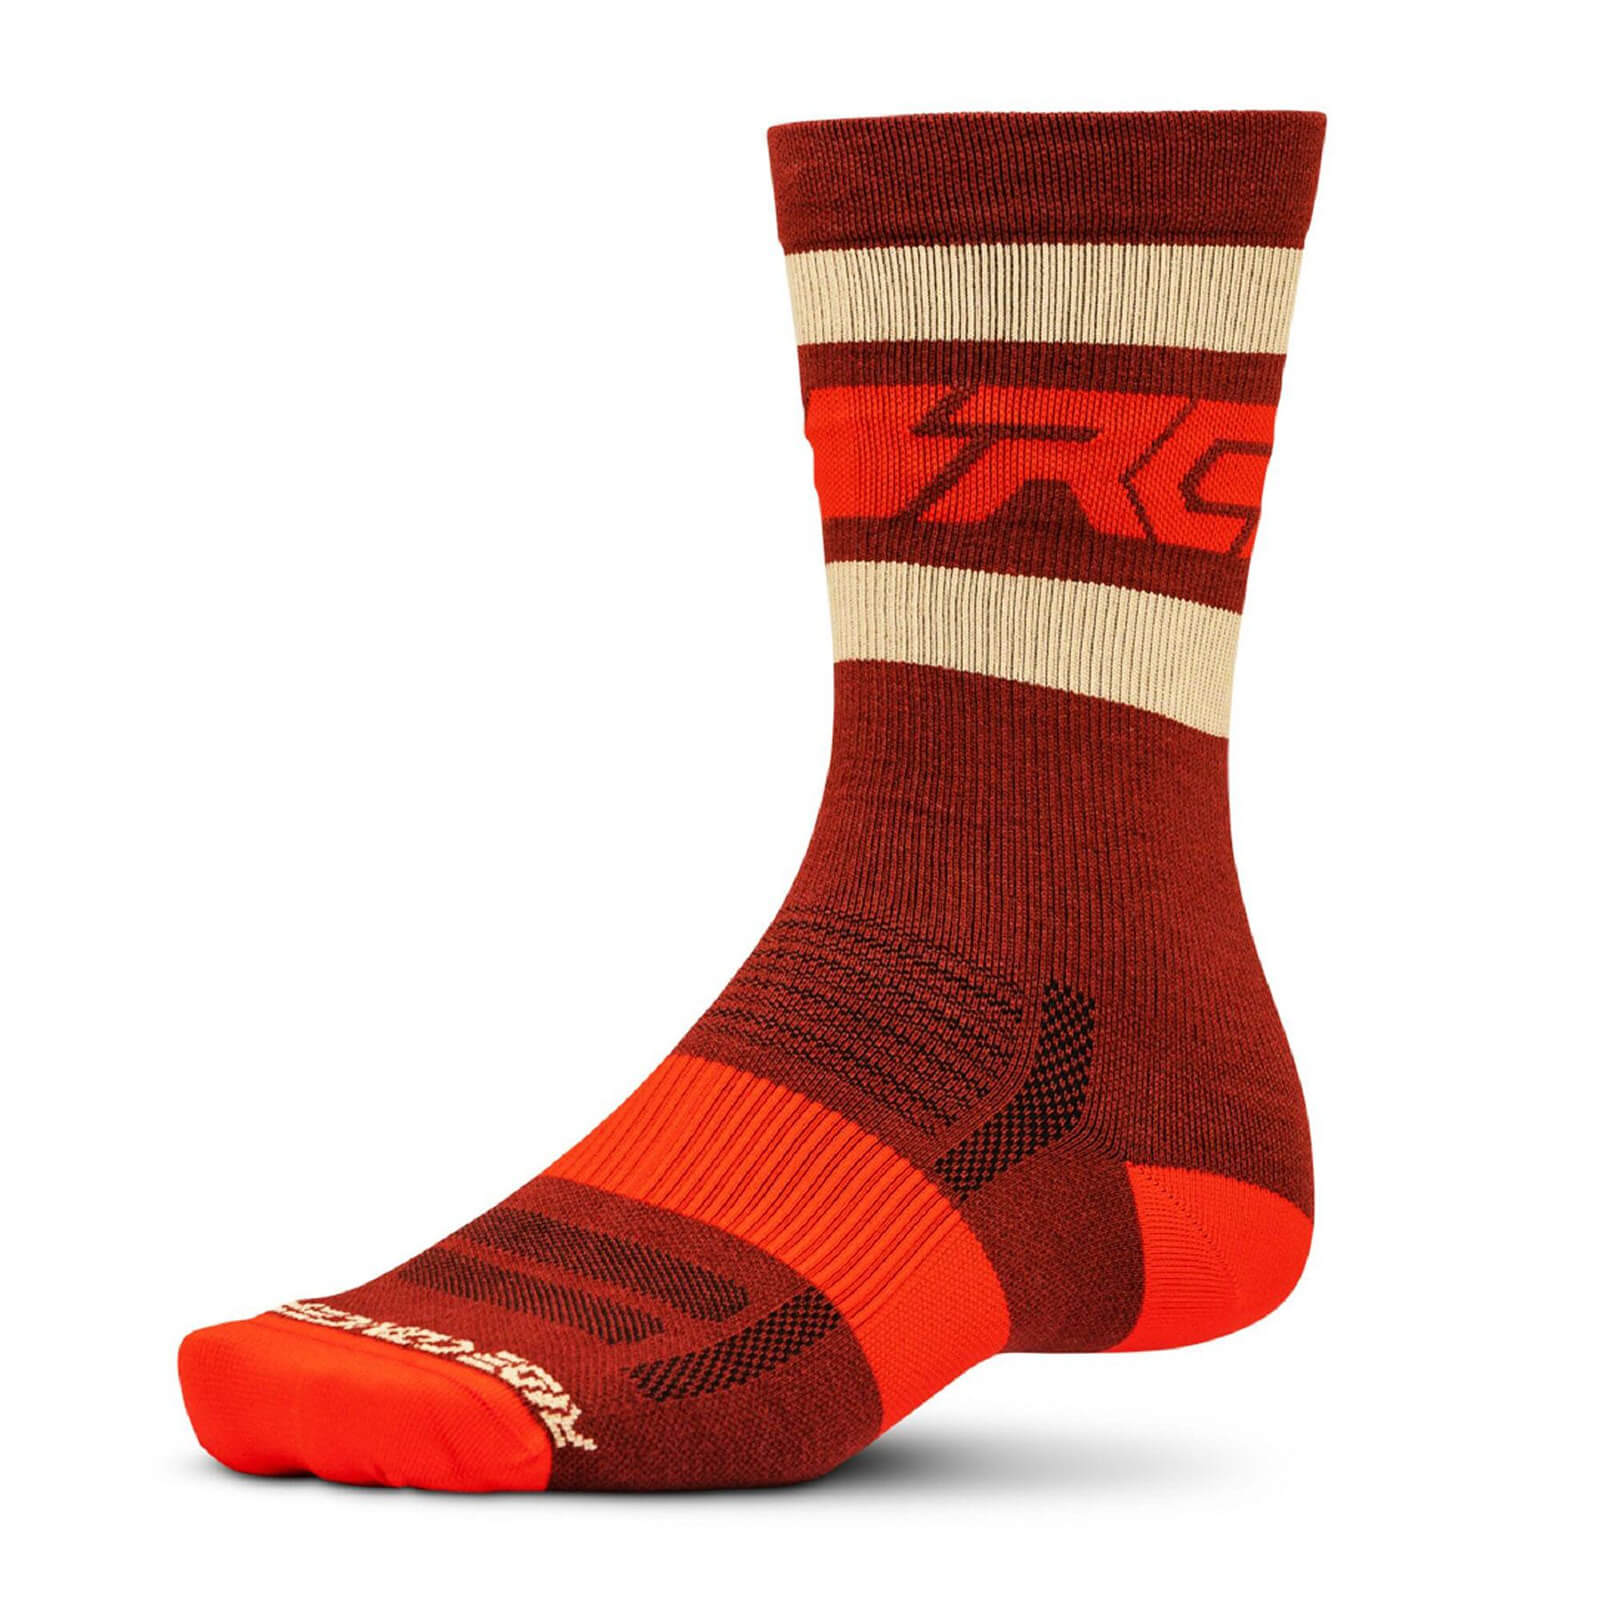 Ride Concepts Fifty/Fifty MTB Socks - M - Oxblood